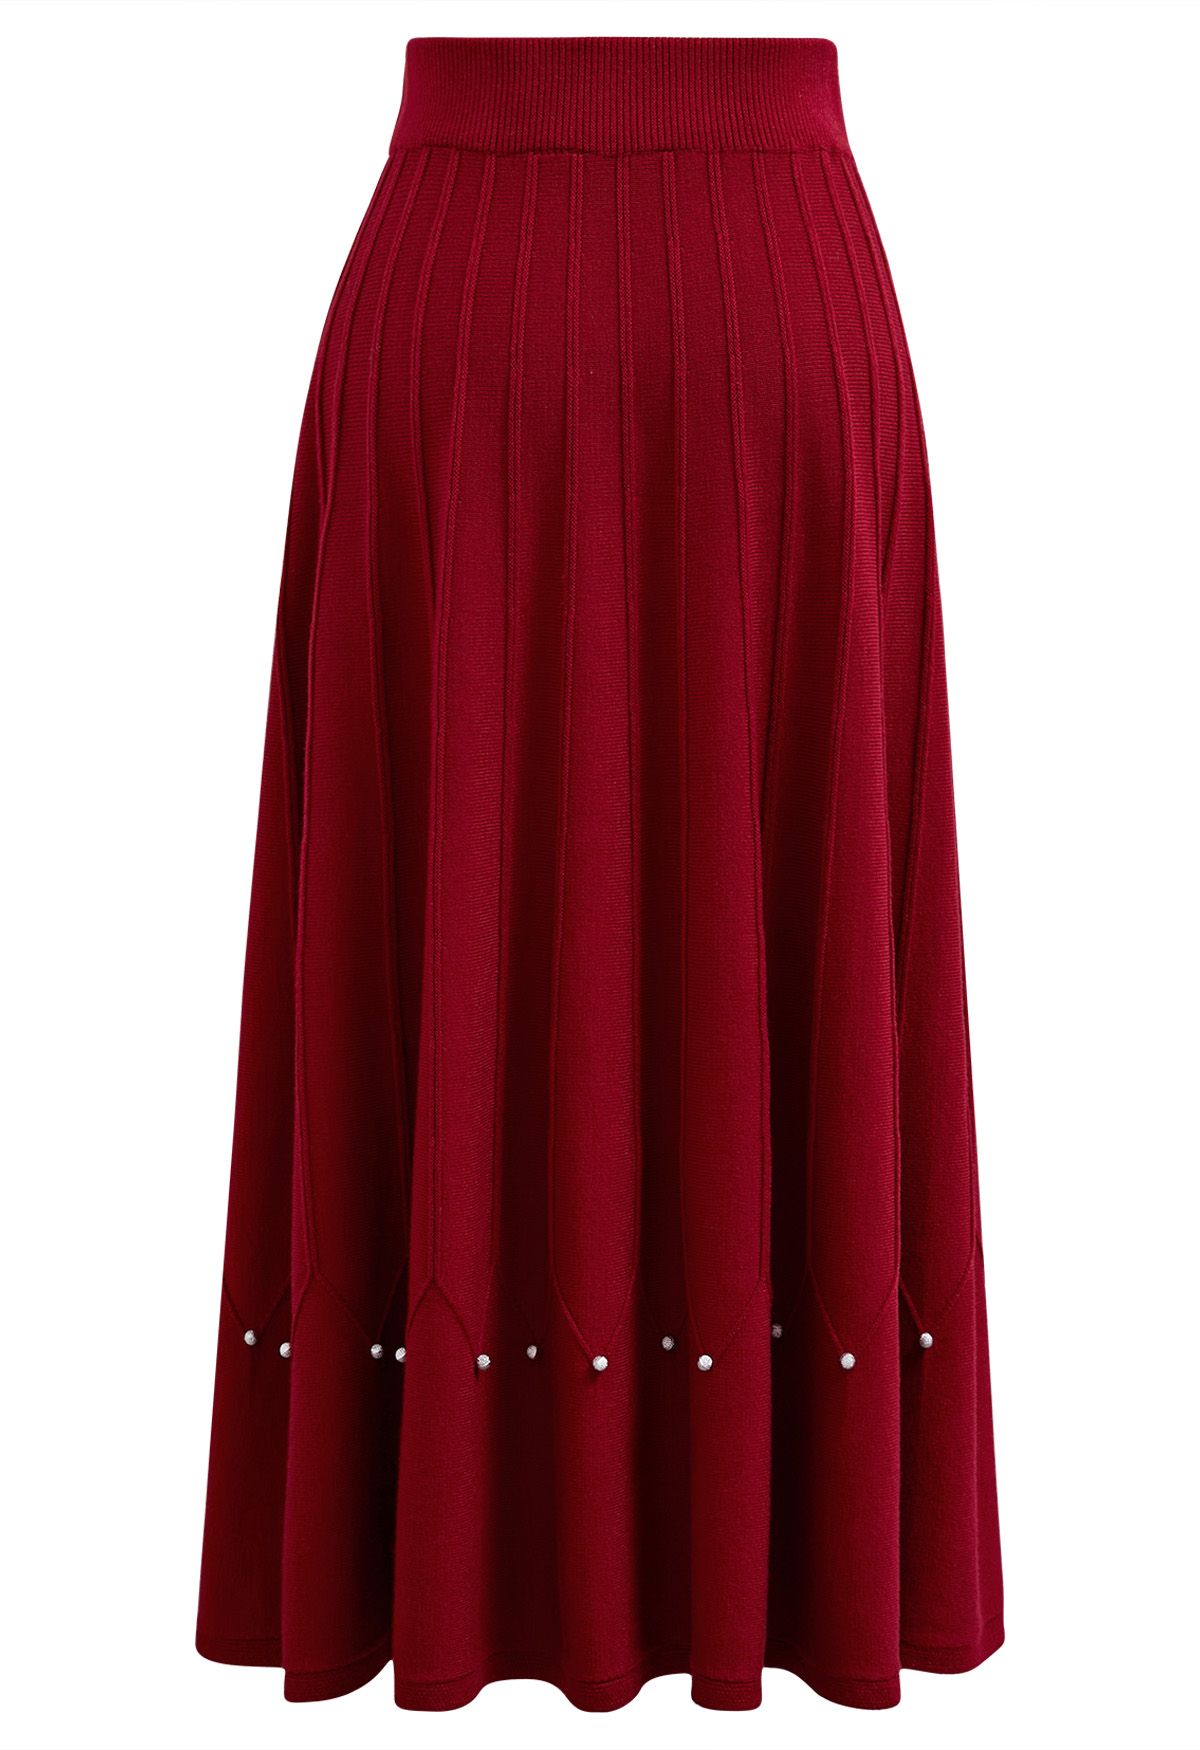 Silver Bead Embellished Seam Knit Midi Skirt in Red